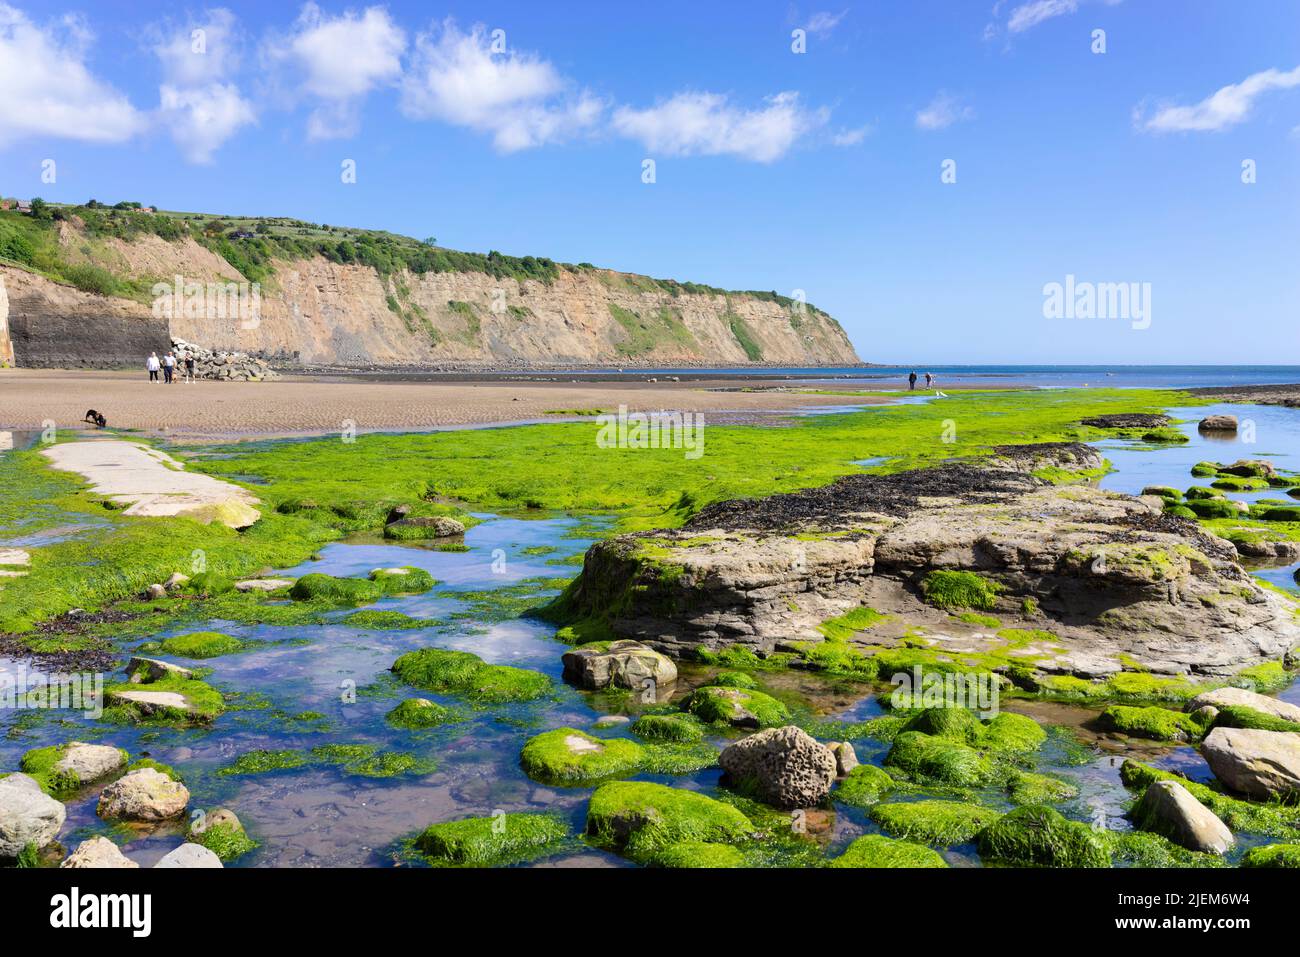 Robin Hood's Bay Yorkshire with beach and seaweed covered rocks seen from the slipway in the village of Robin Hood's Bay Yorkshire England UK GB Stock Photo